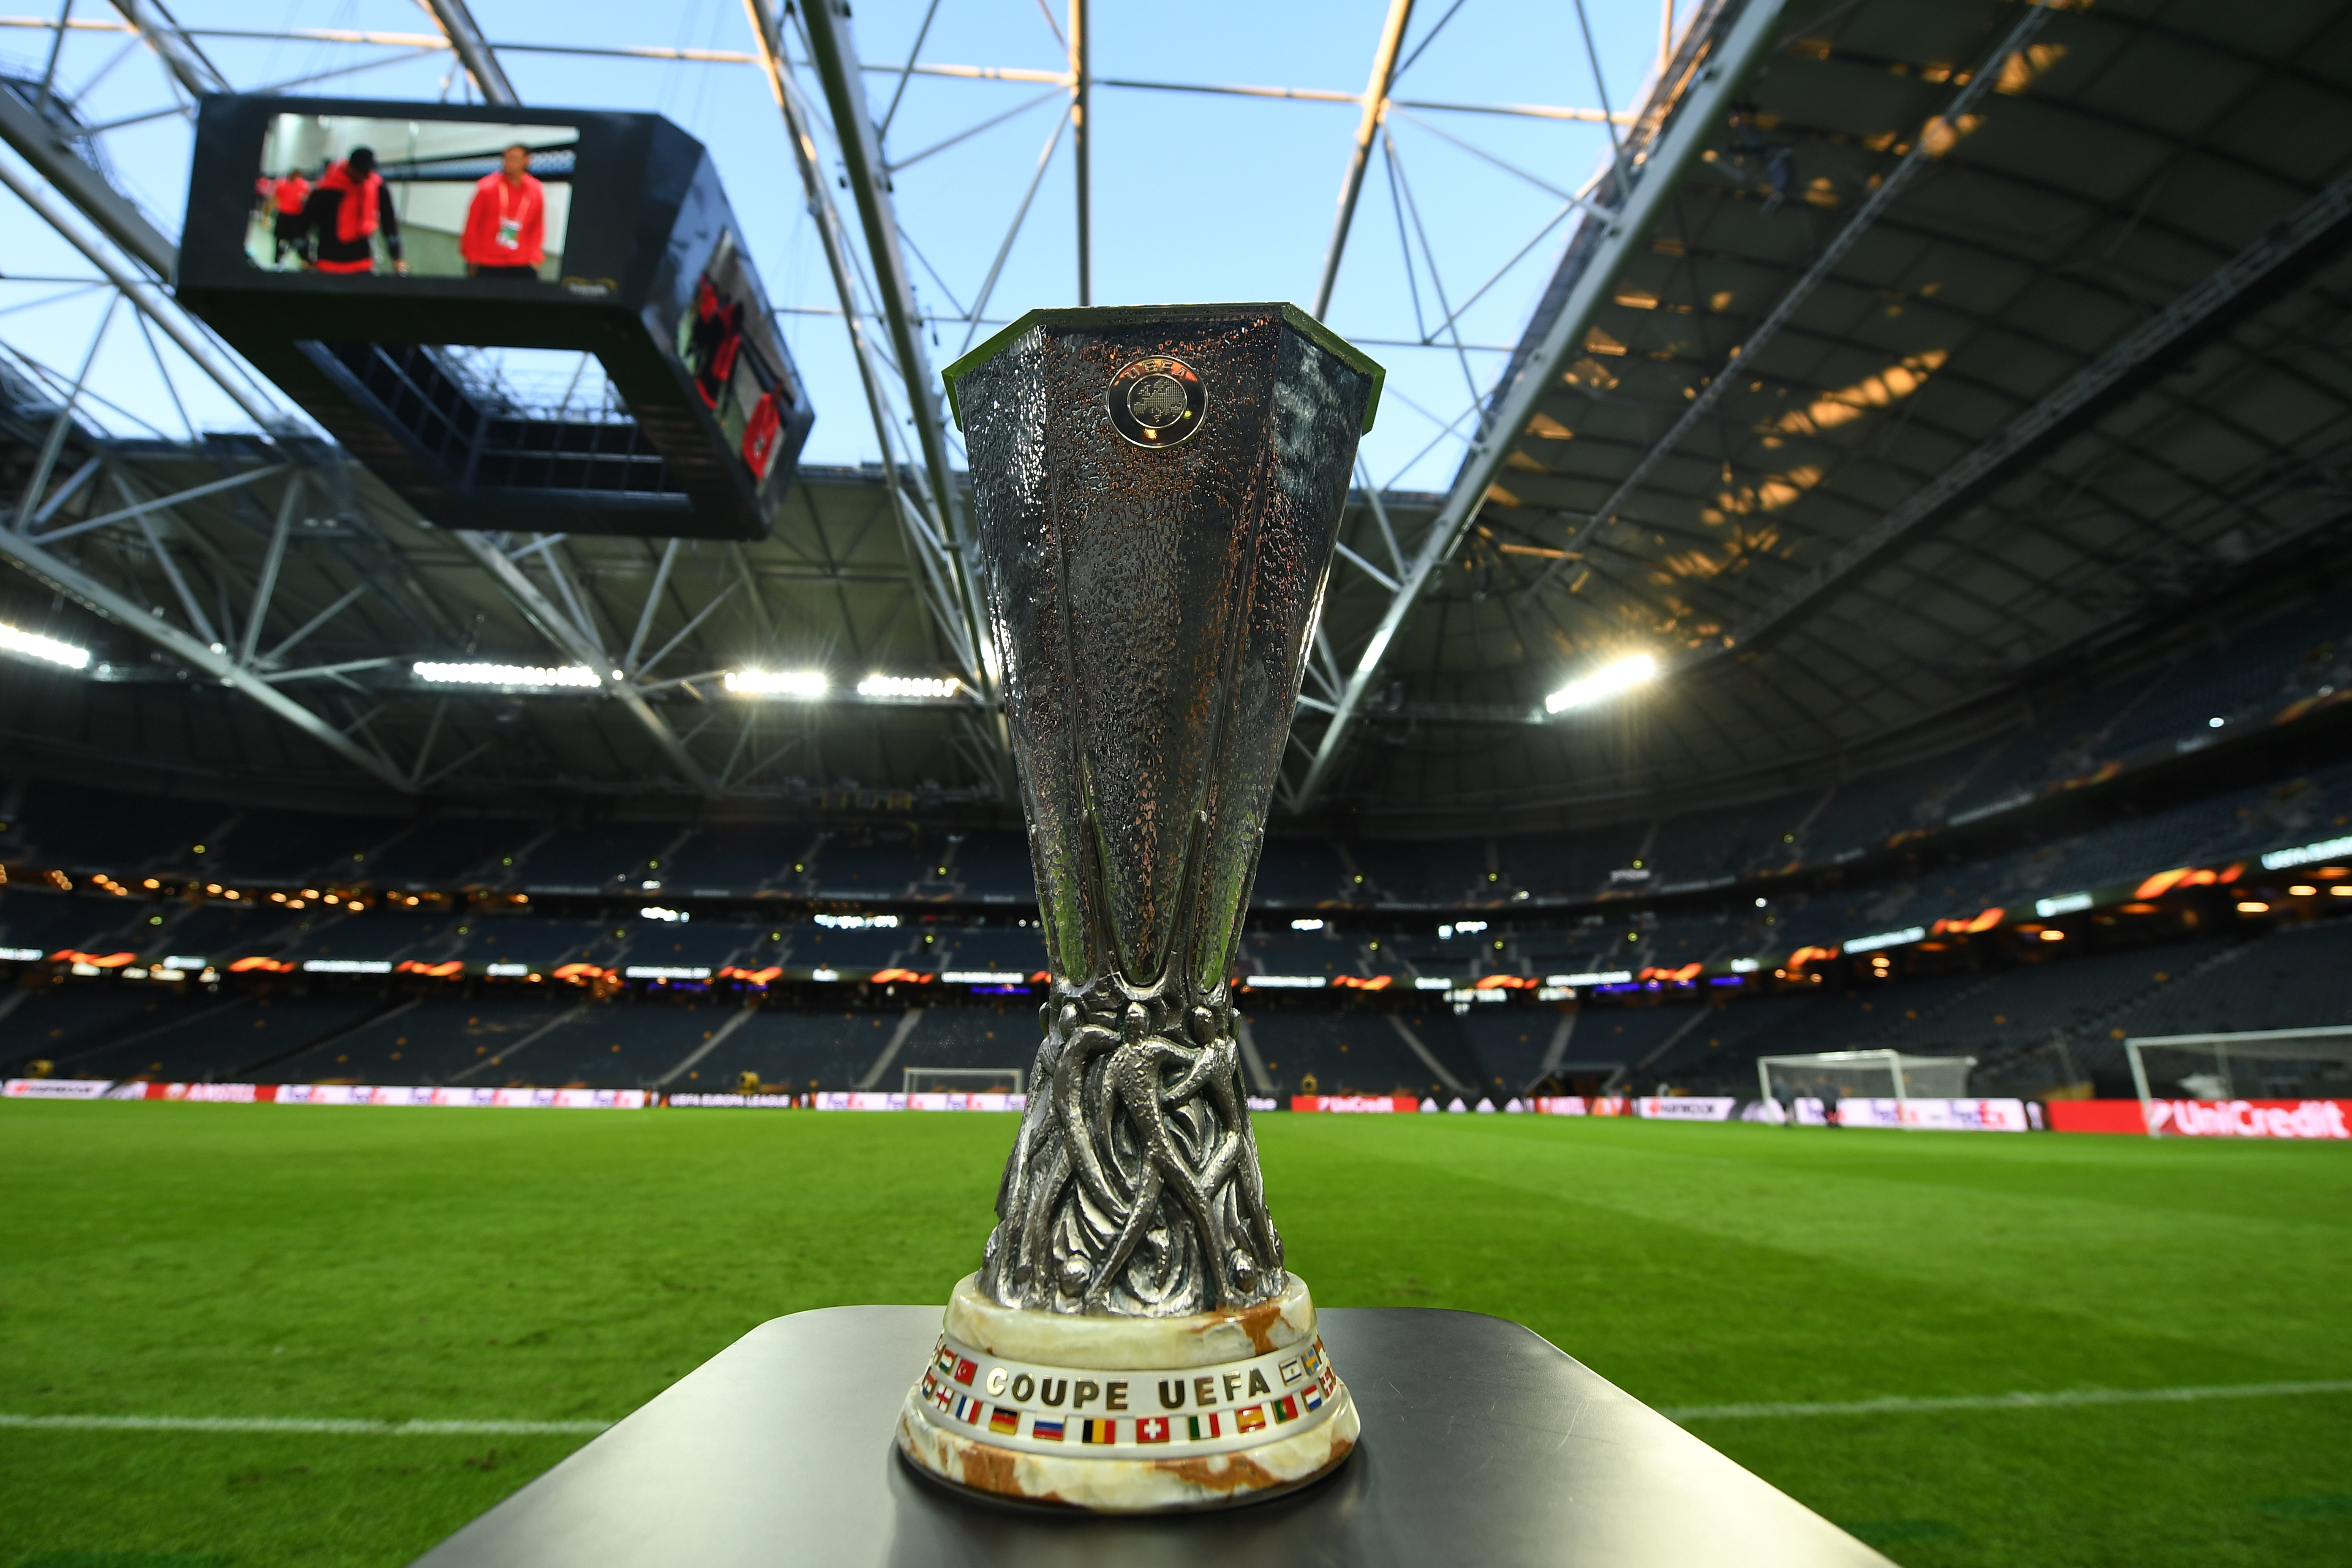 STOCKHOLM, SWEDEN - MAY 23:  A view of the UEFA Europa League trophy ahead of the UEFA Europa League Final between Ajax and Manchester United at Friends Arena on May 23, 2017 in Stockholm, Sweden.  (Photo by Mike Hewitt/Getty Images)